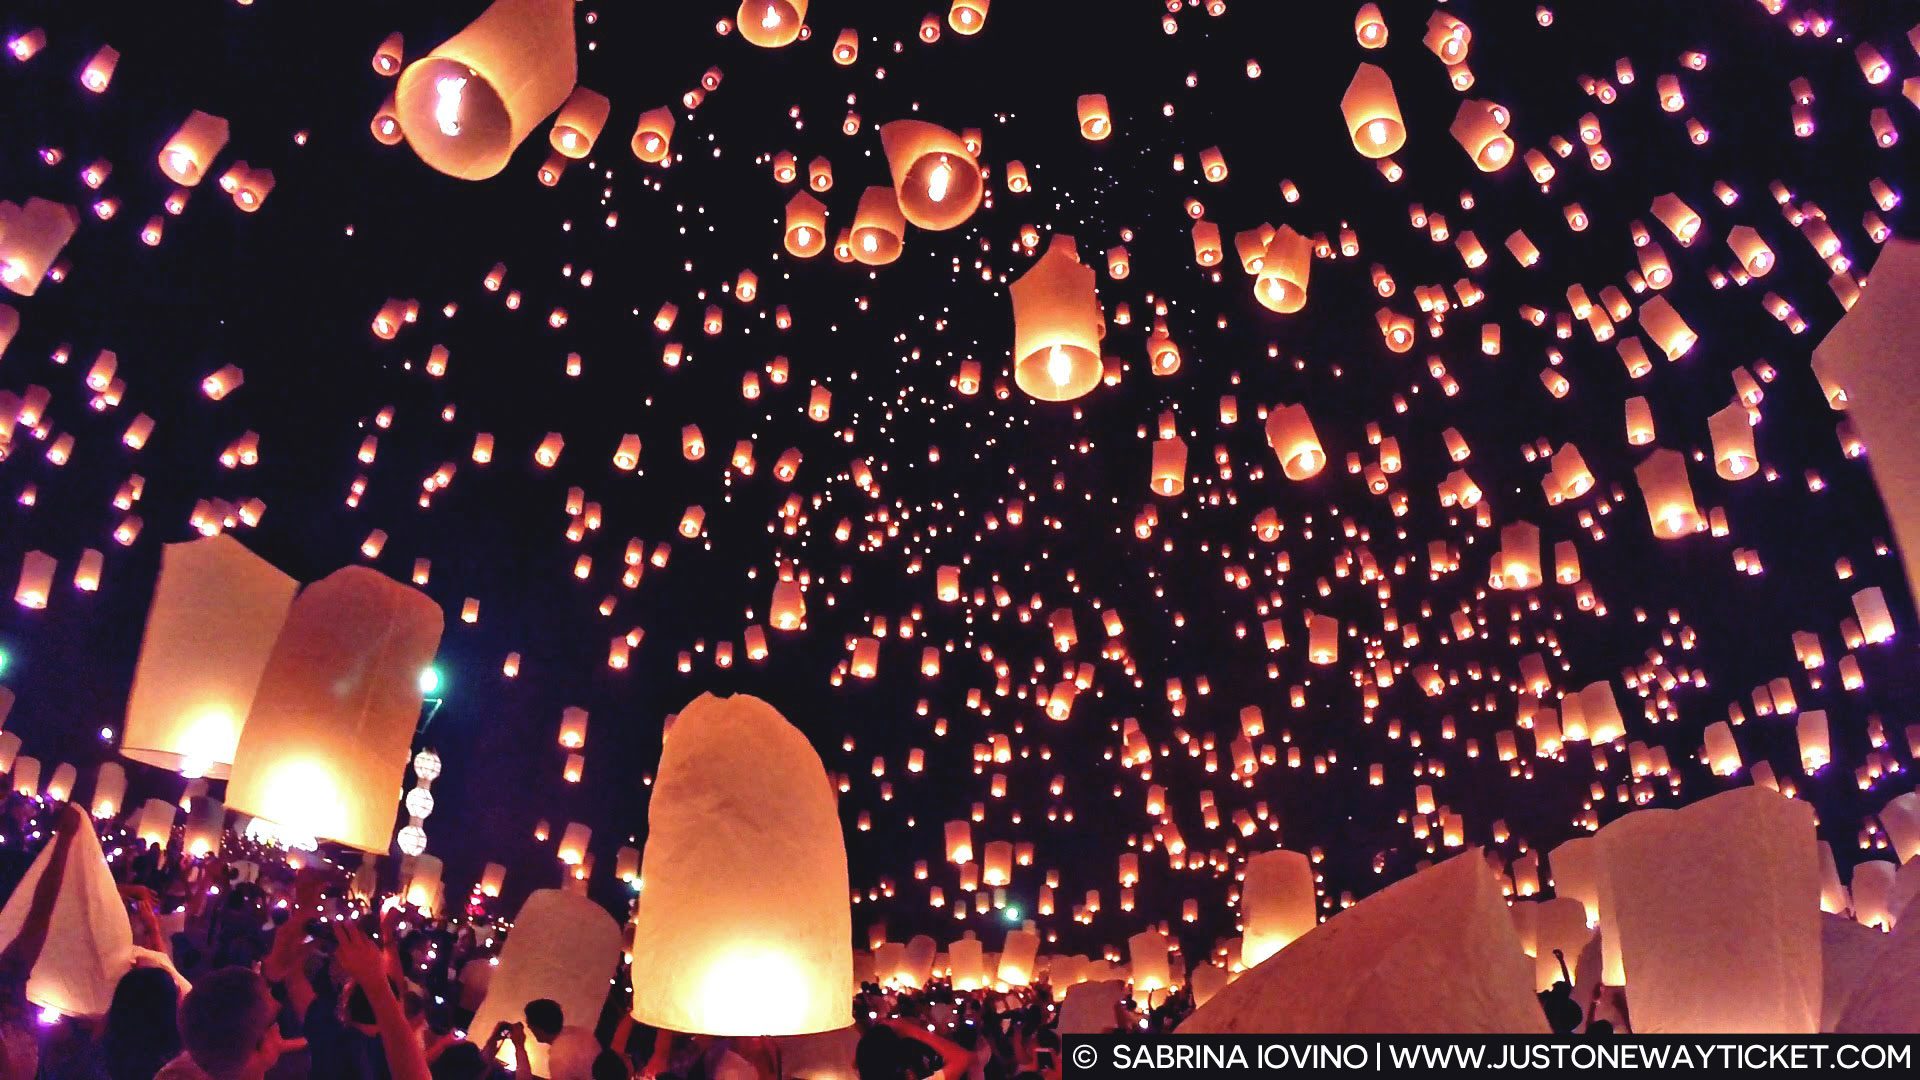 Enchanting scenes from Loy Krathong, magical lantern festival in Thailand